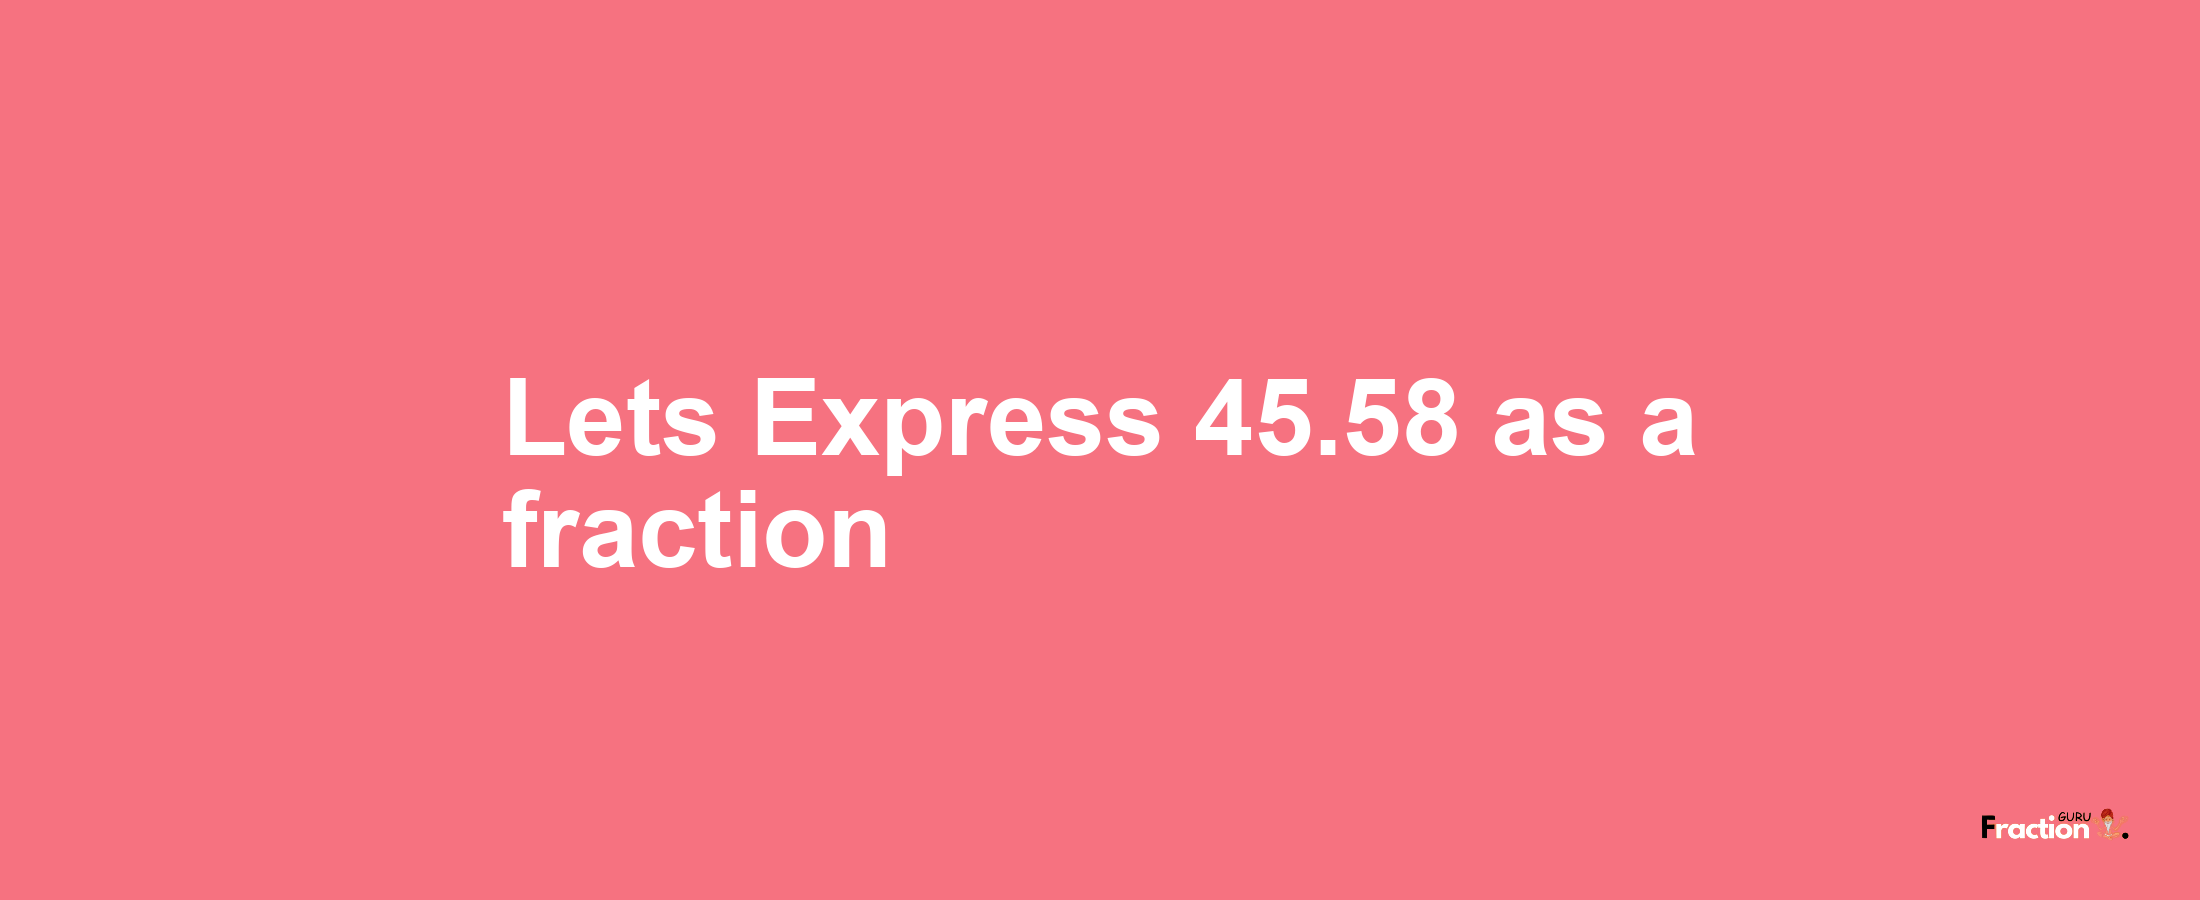 Lets Express 45.58 as afraction